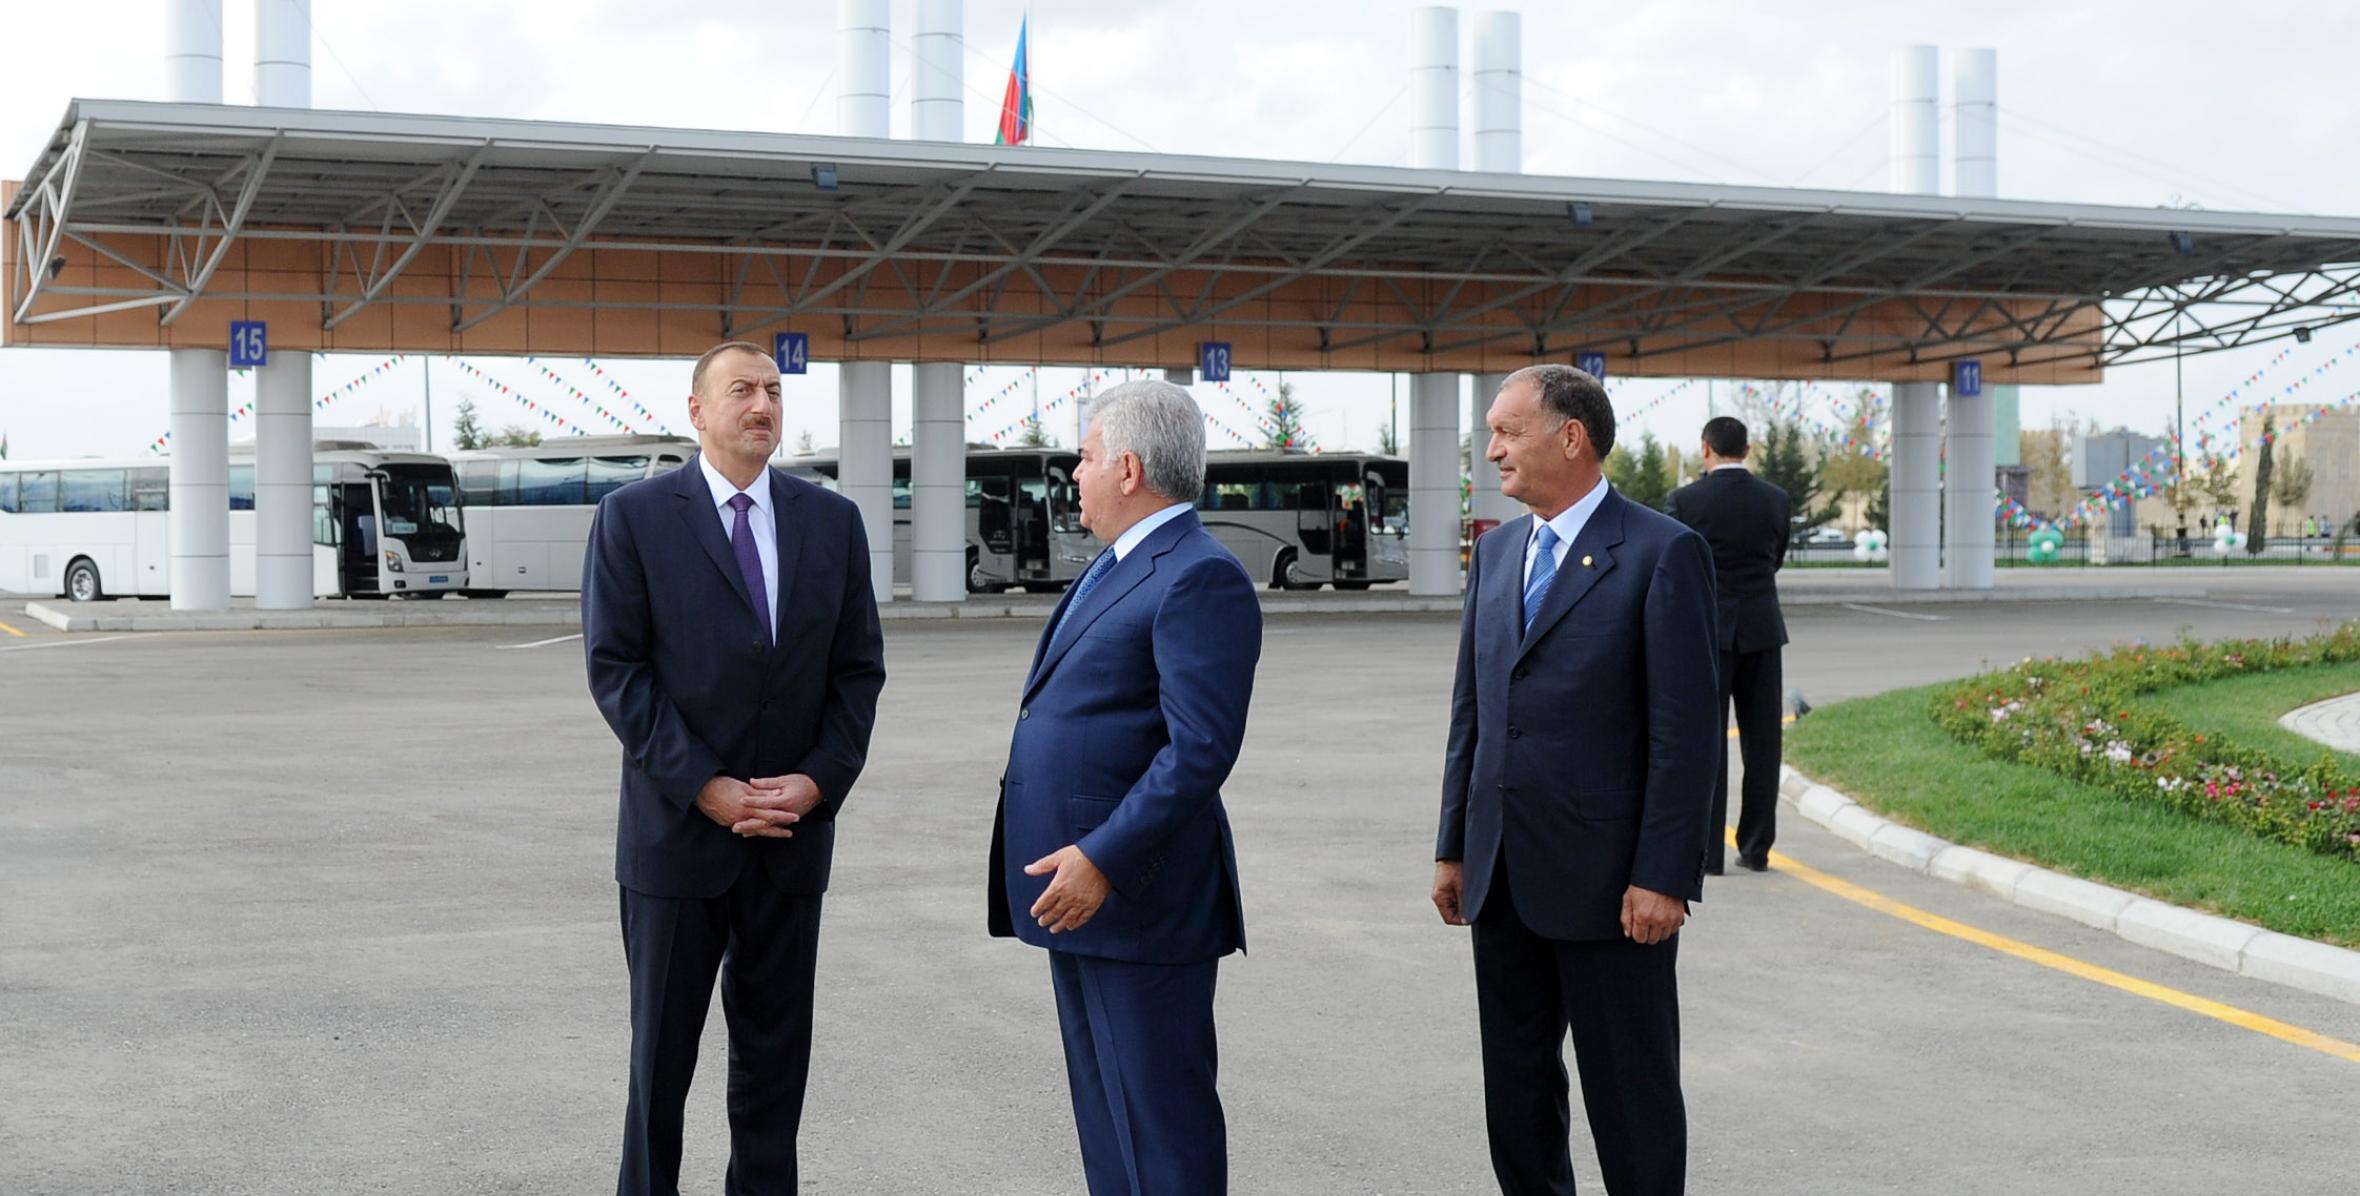 Ilham Aliyev attended the opening of the Yevlakh bus station